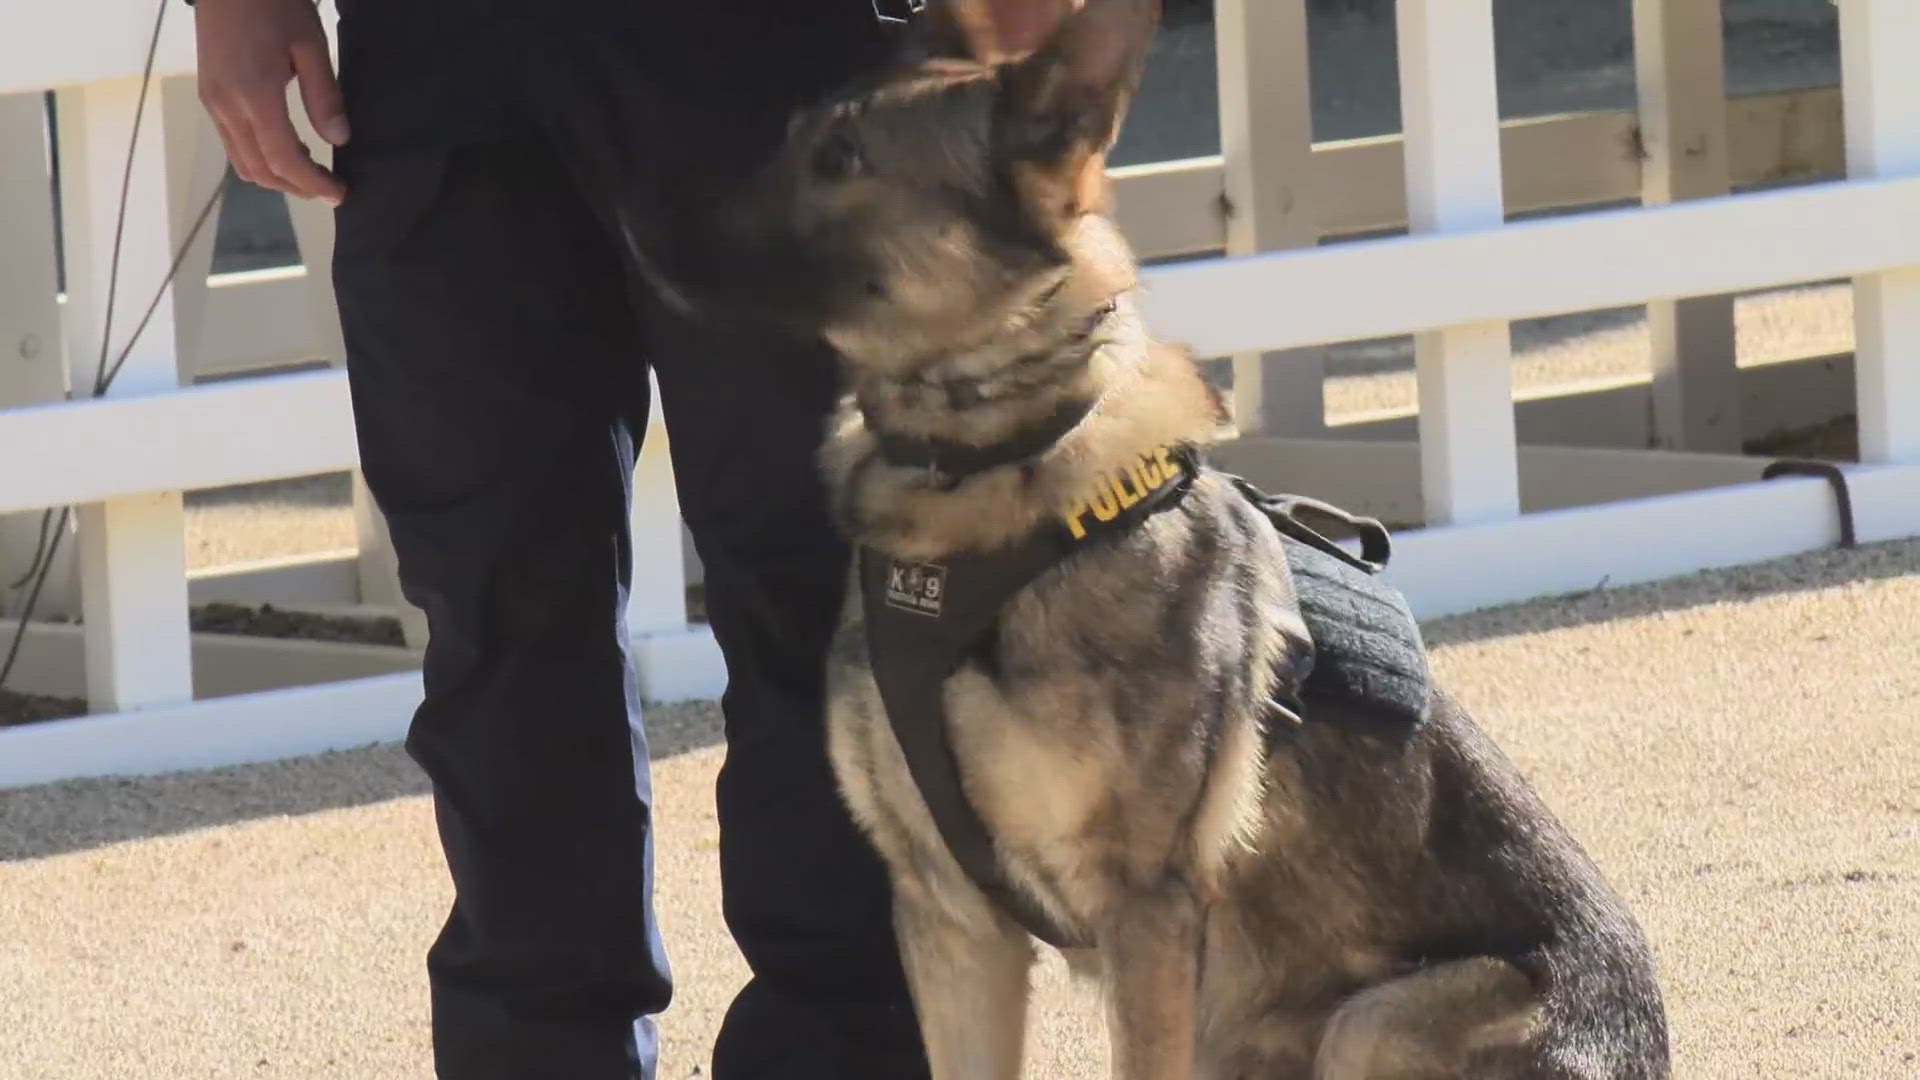 California Highway Patrol graduates 8 canine officers and handlers